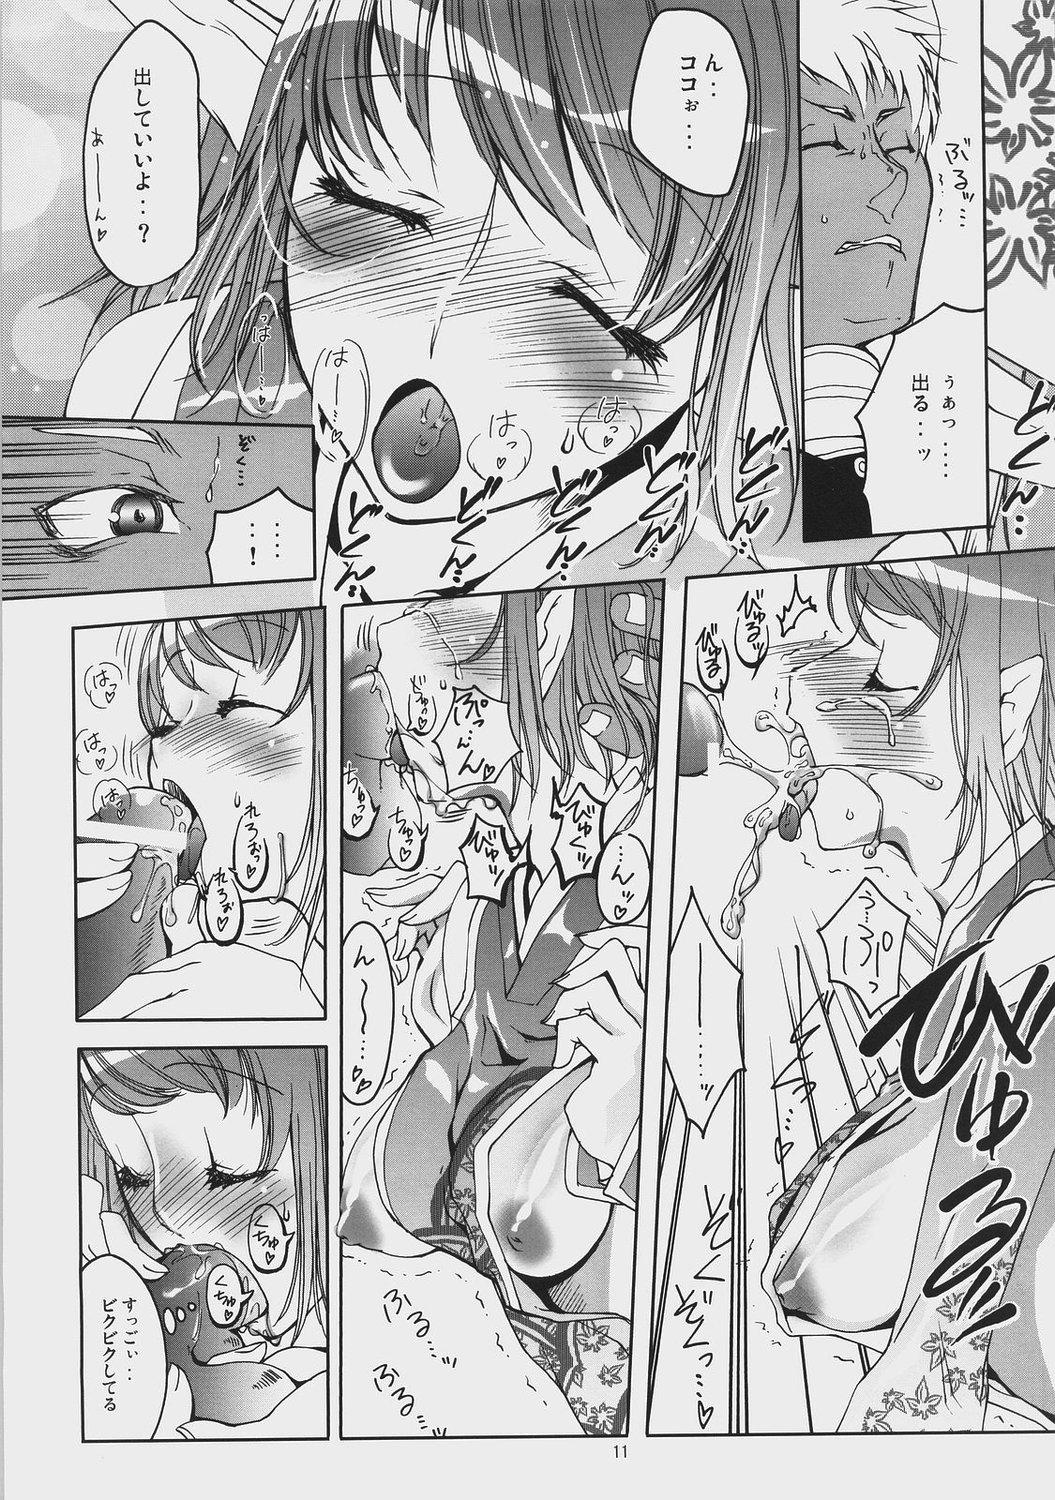 Edging Beauty and the Beast - Phantasy star universe Hot Couple Sex - Page 10